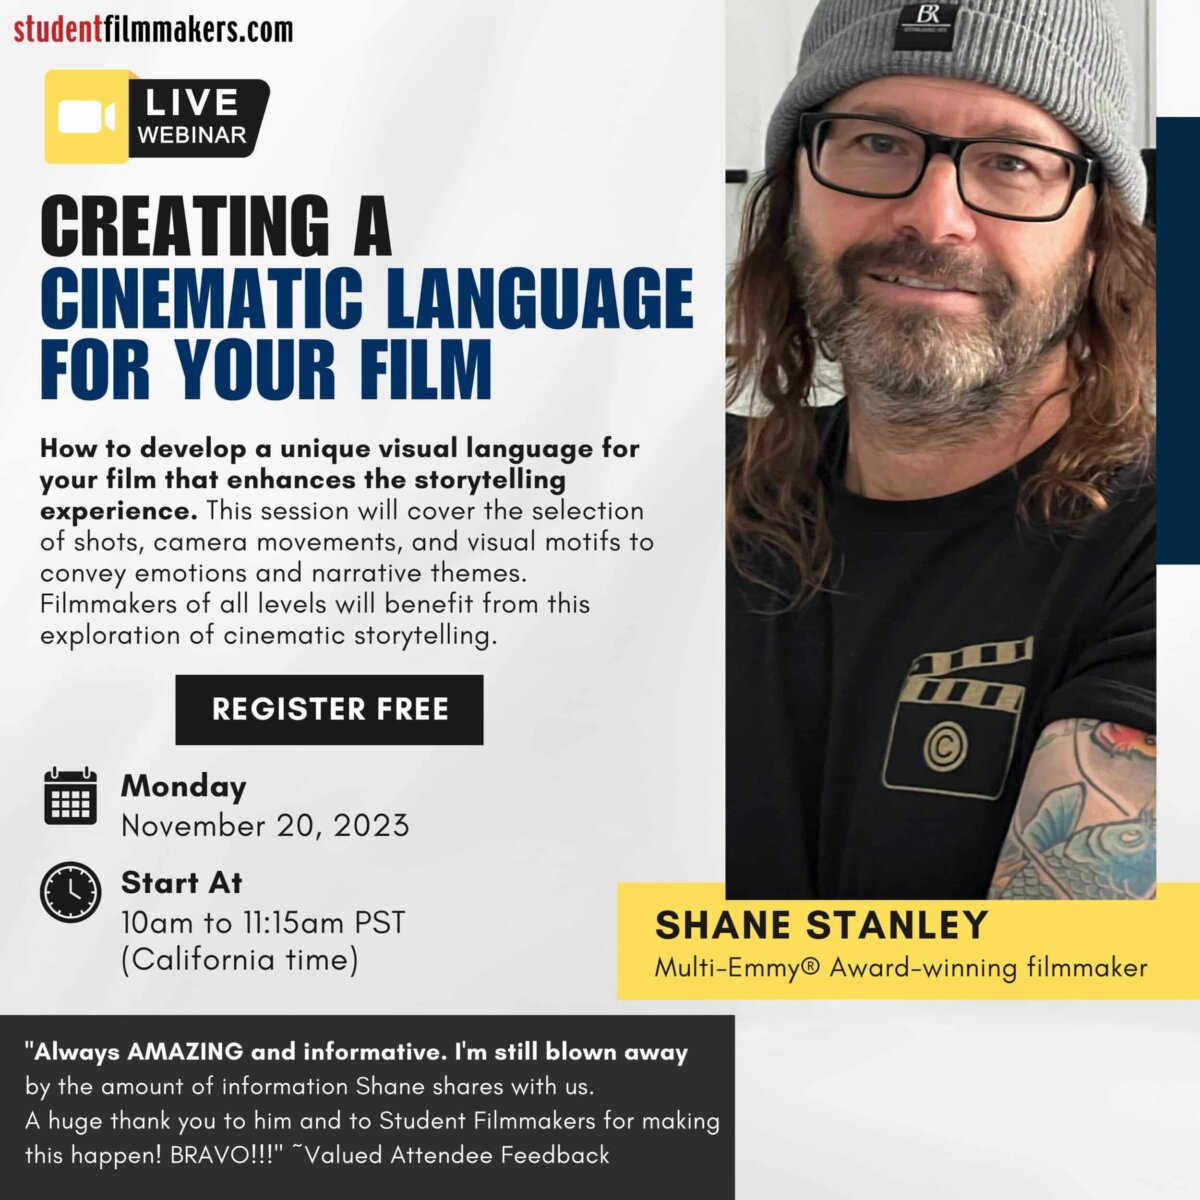 Live Webinar, "Creating a Cinematic Language for Your Film" with Multi-Emmy® Award-Winning Filmmaker Shane Stanley